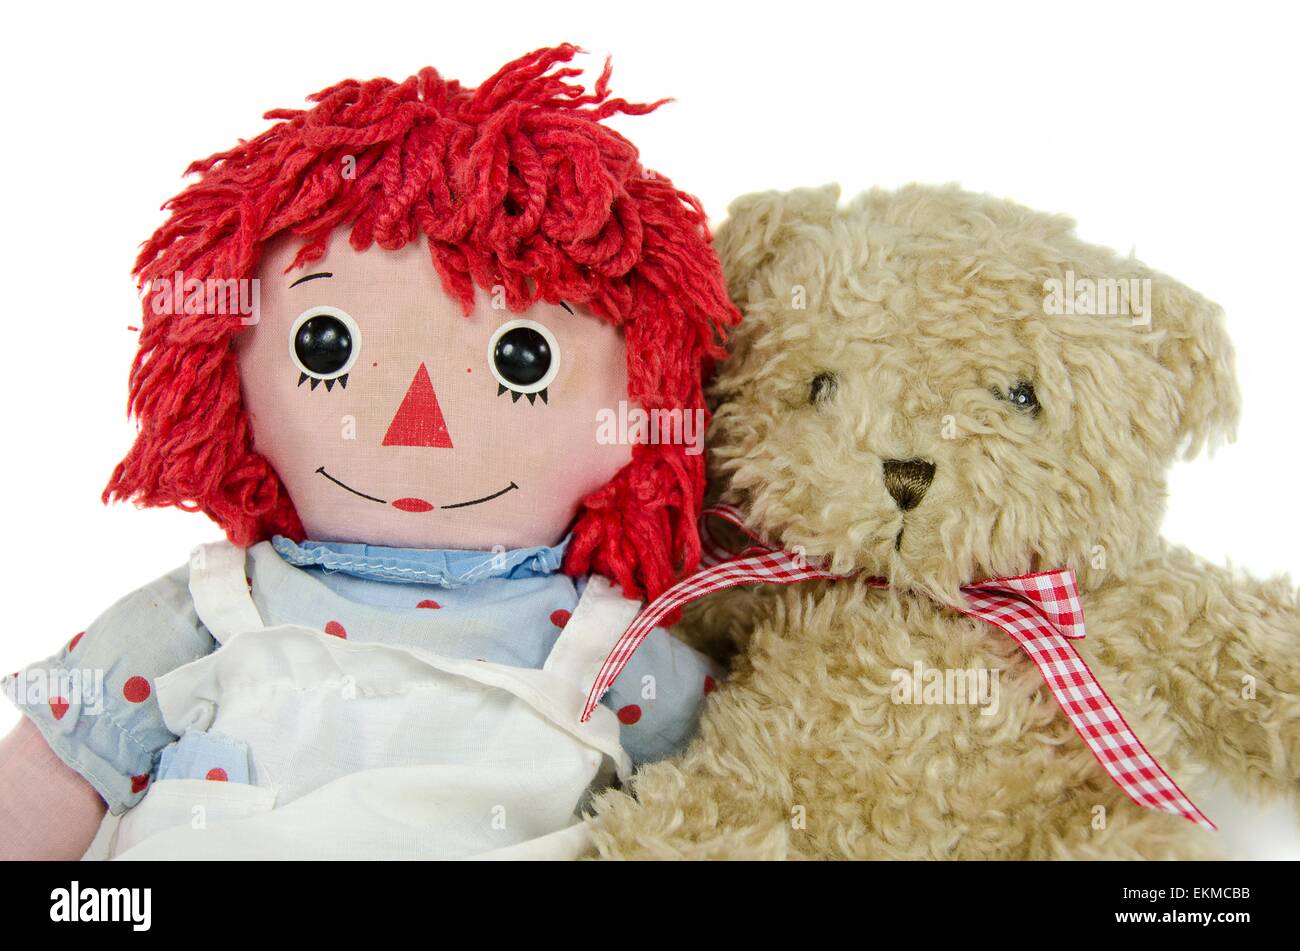 Old rag doll with teddy bear isolated on white. Stock Photo